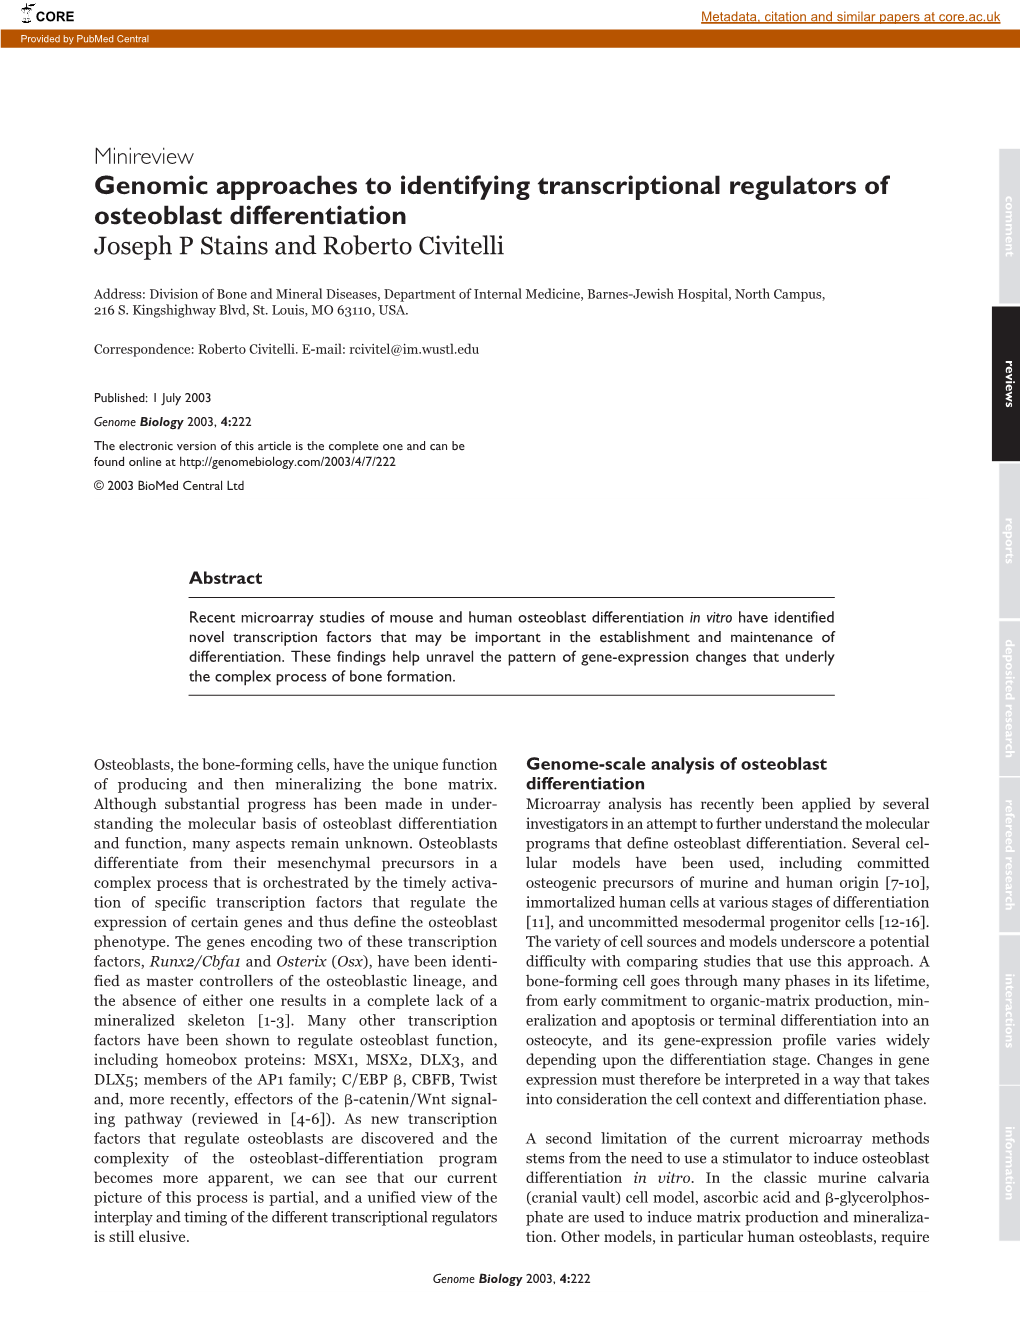 Genomic Approaches to Identifying Transcriptional Regulators of Comment Osteoblast Differentiation Joseph P Stains and Roberto Civitelli